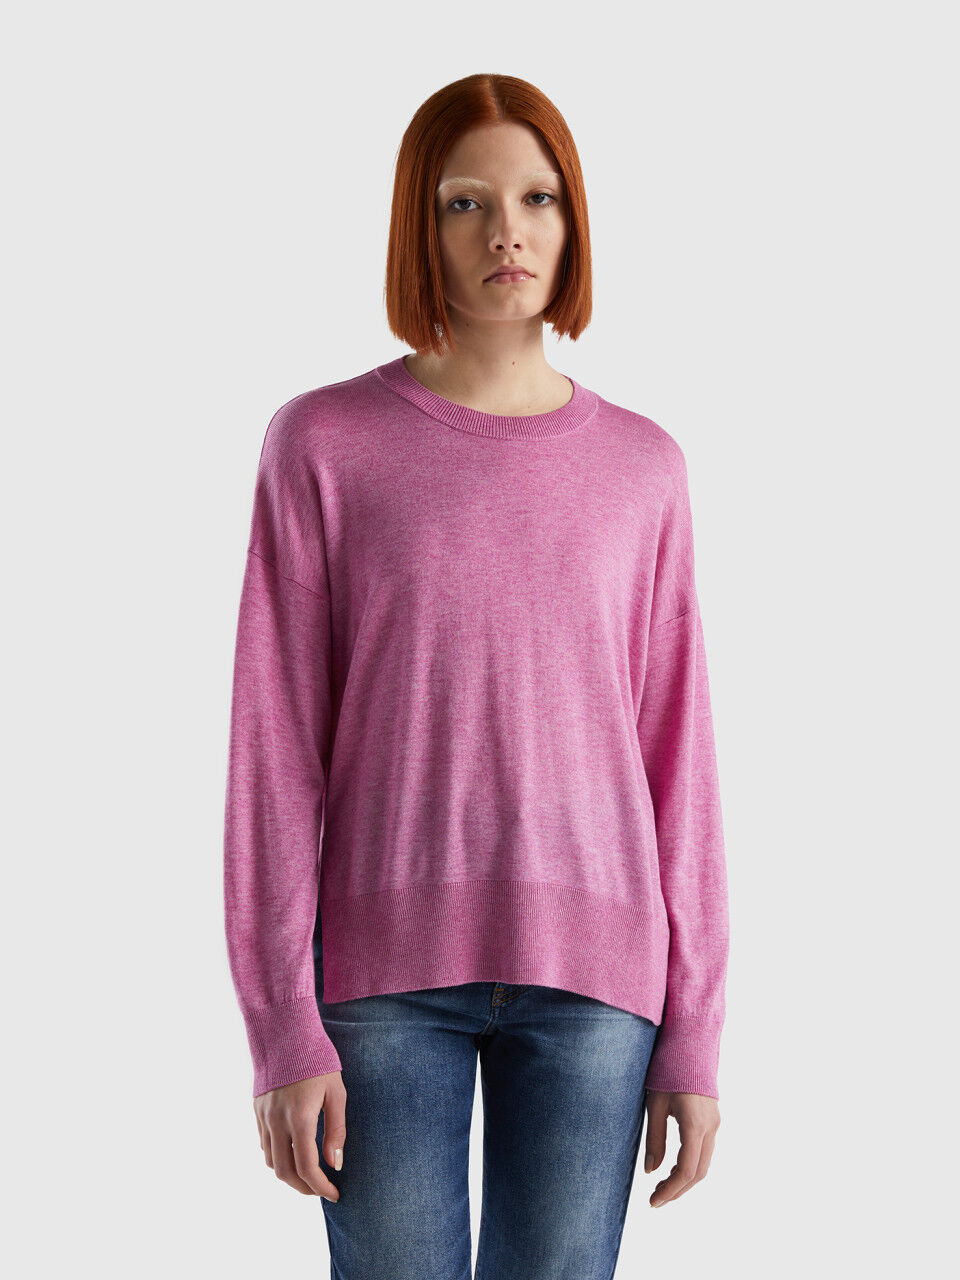 Sweater in viscose blend with slits